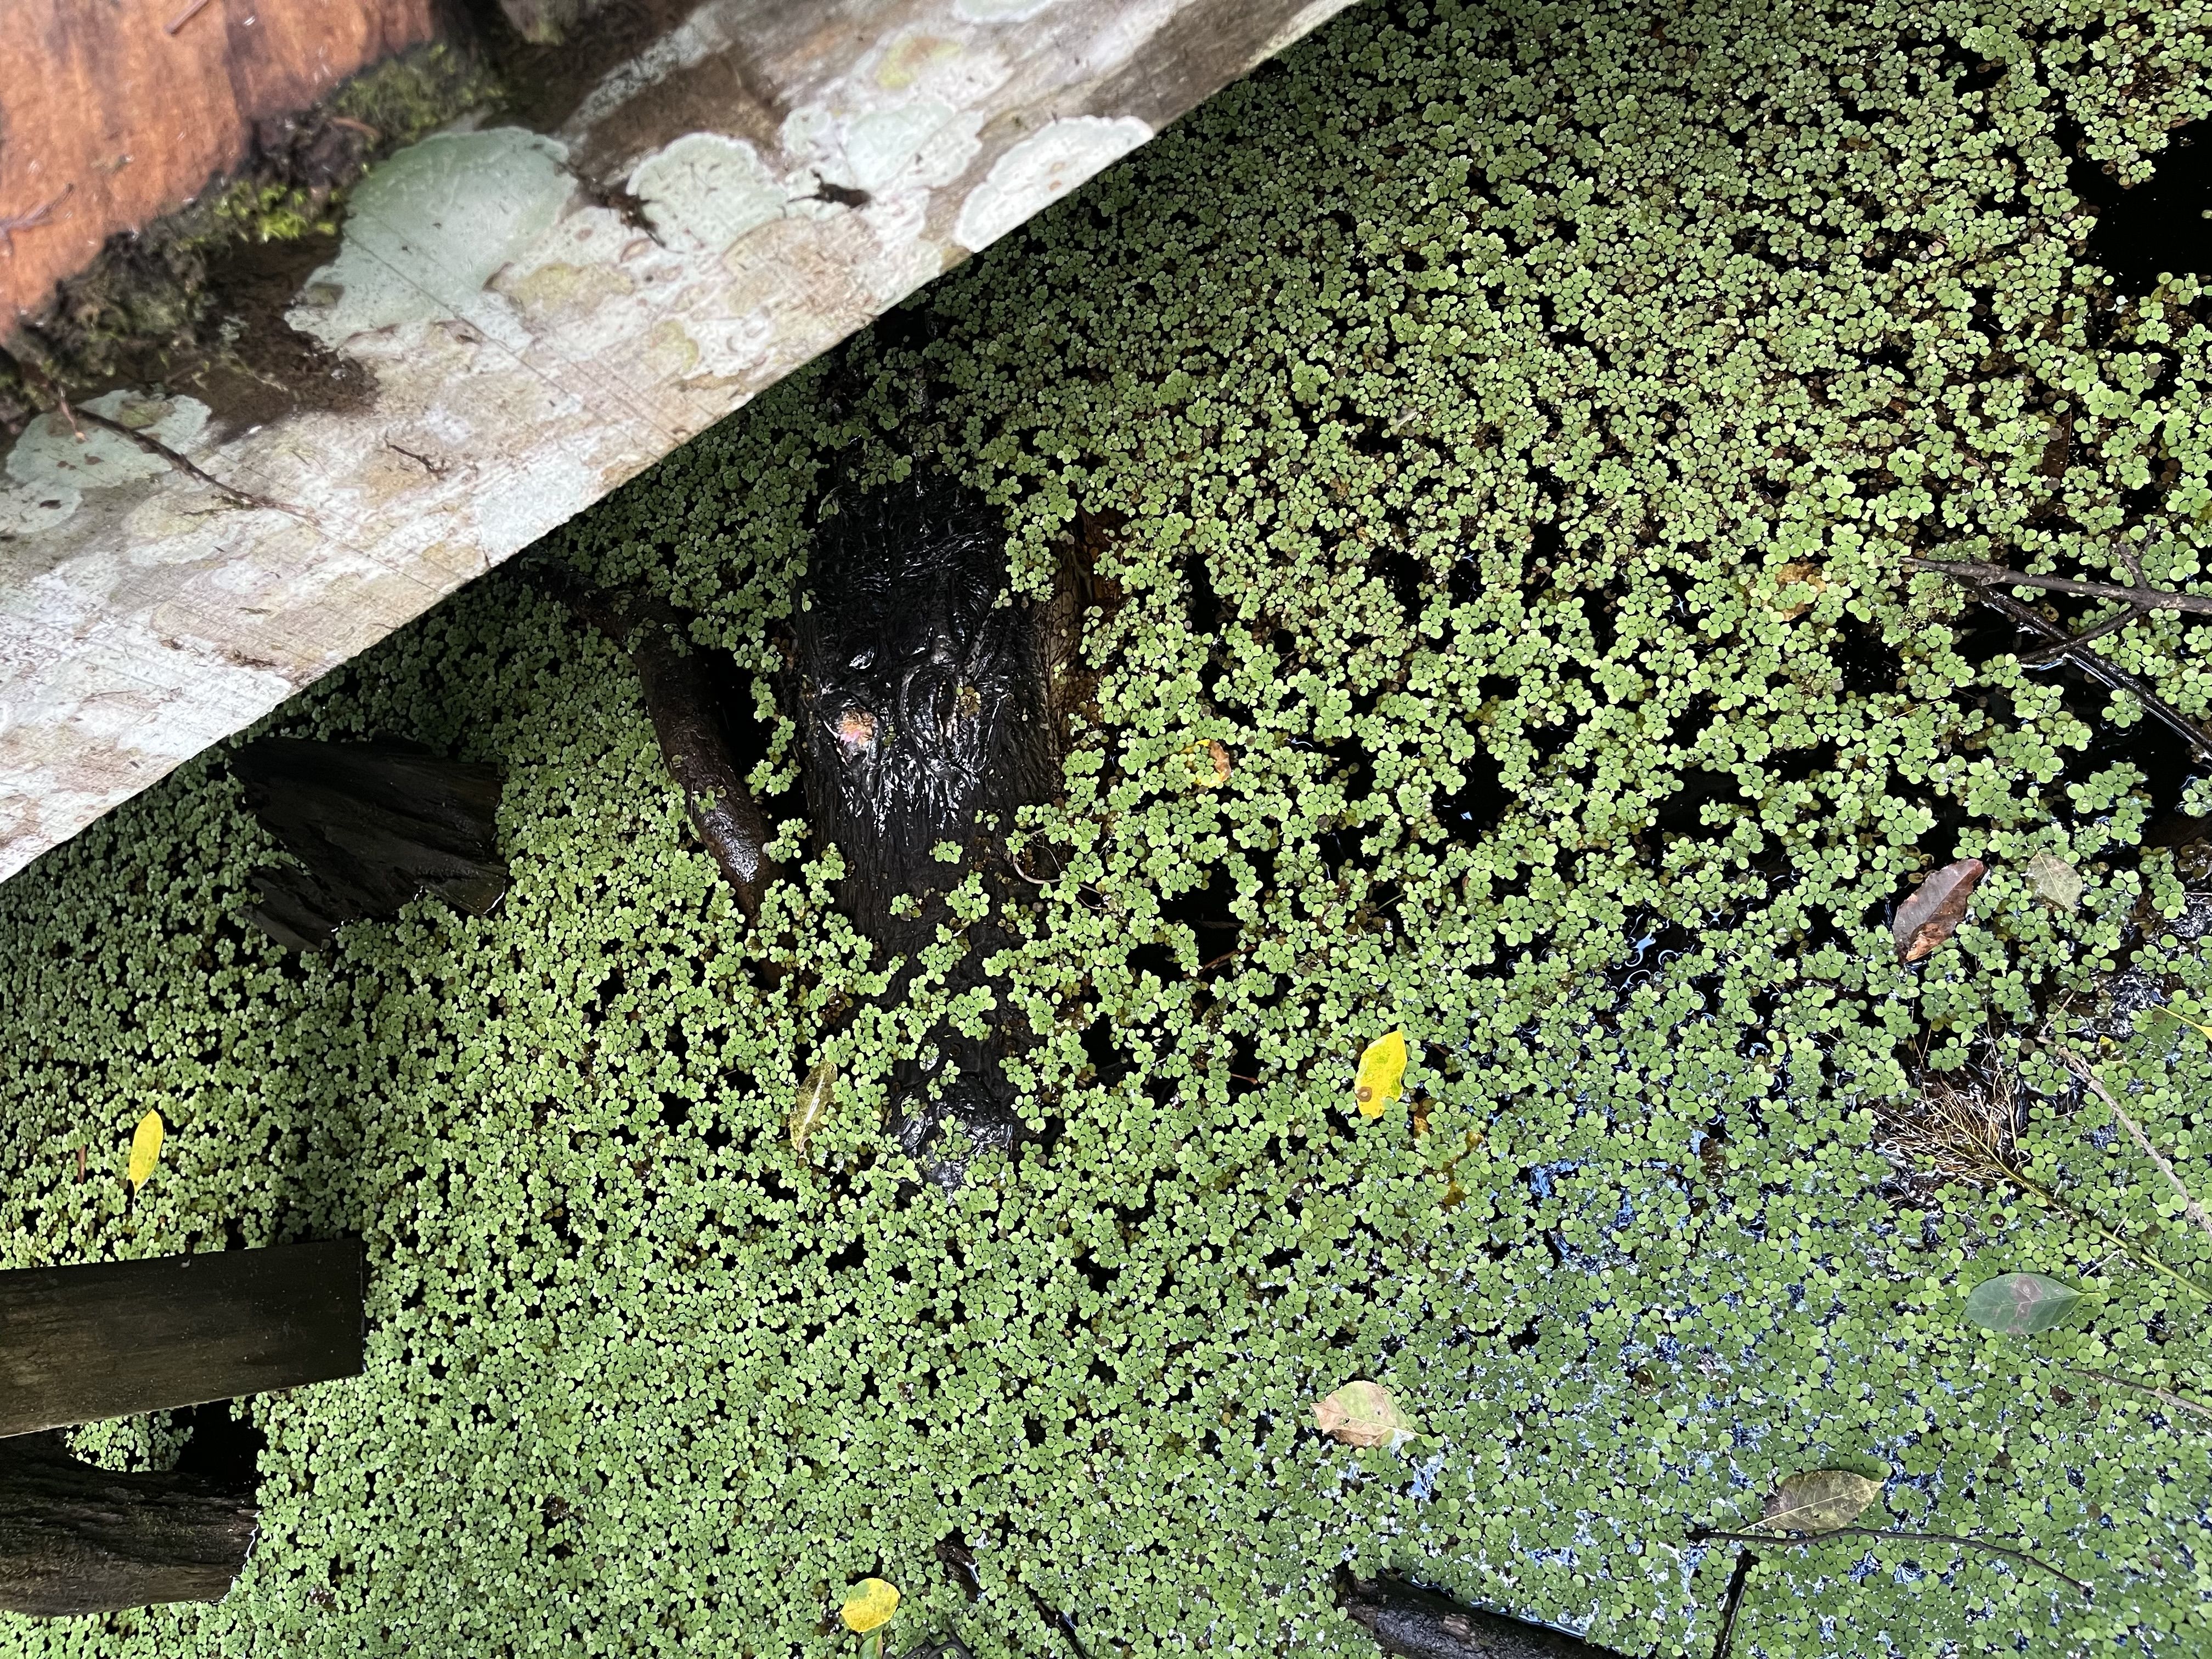 An alligator head poking out of dark water, surrounded by tiny green circular ferns.